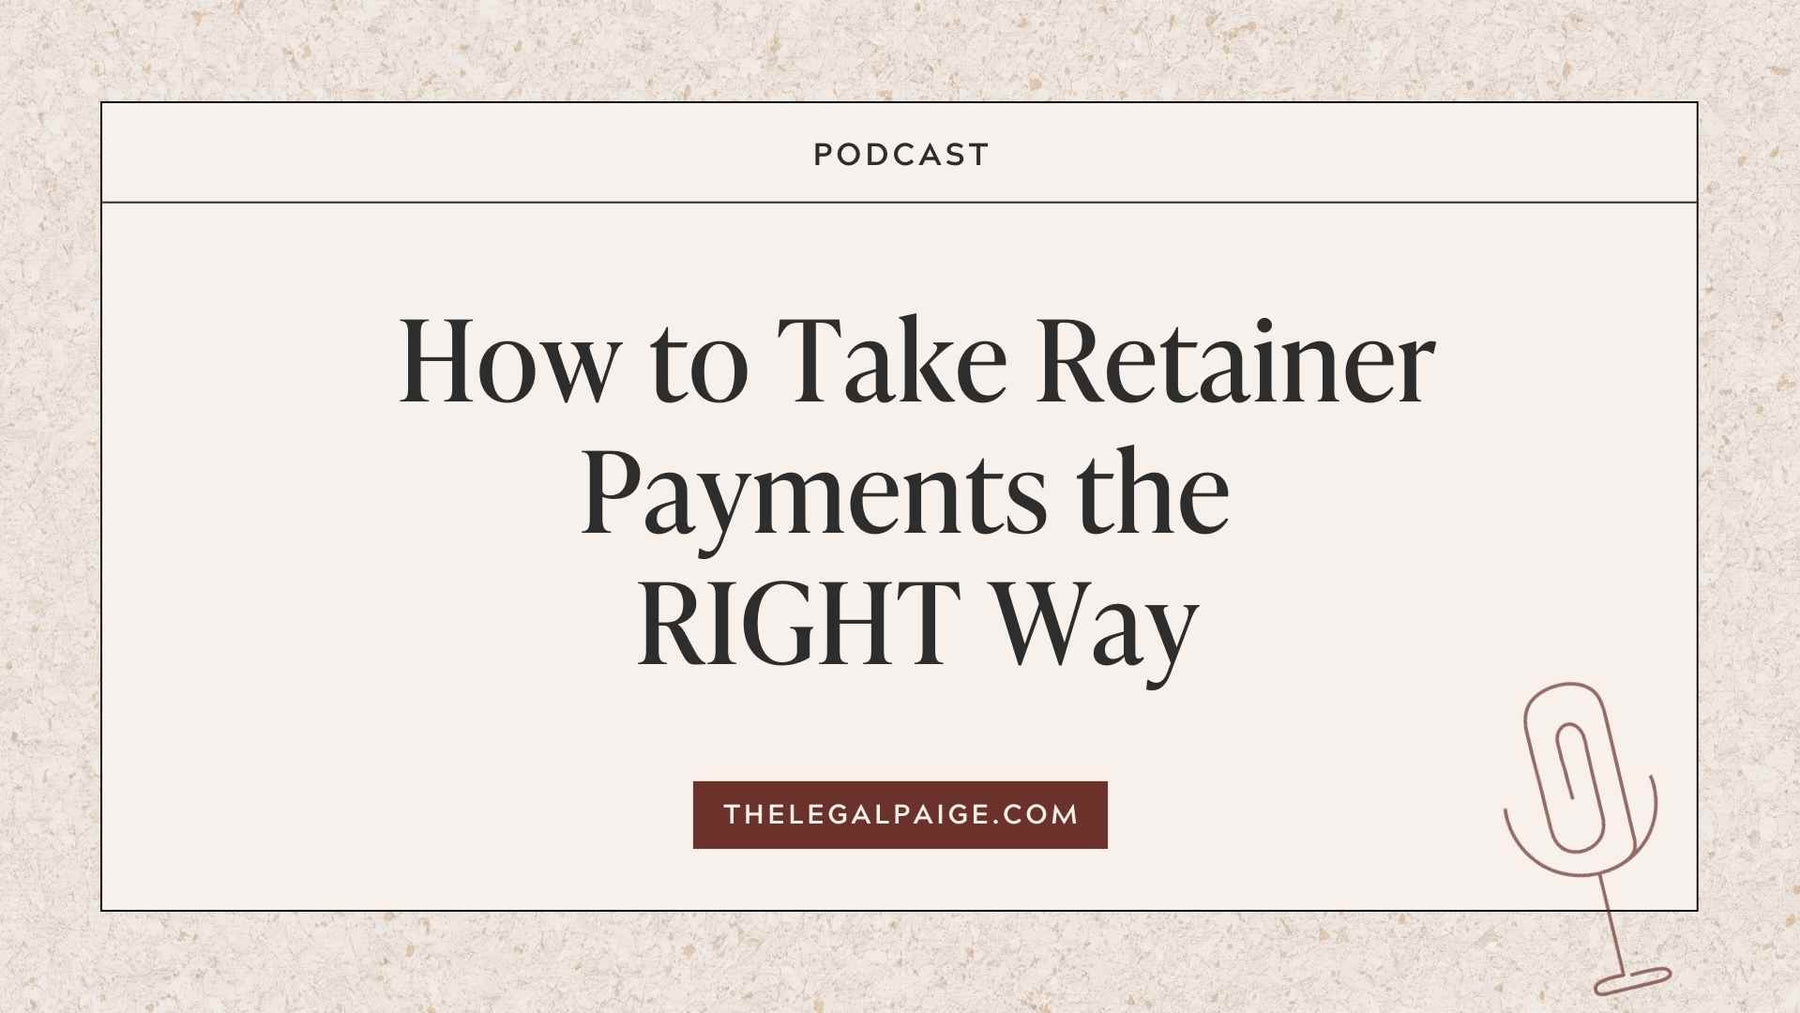 Episode 65: How to Take Retainer Payments the RIGHT Way